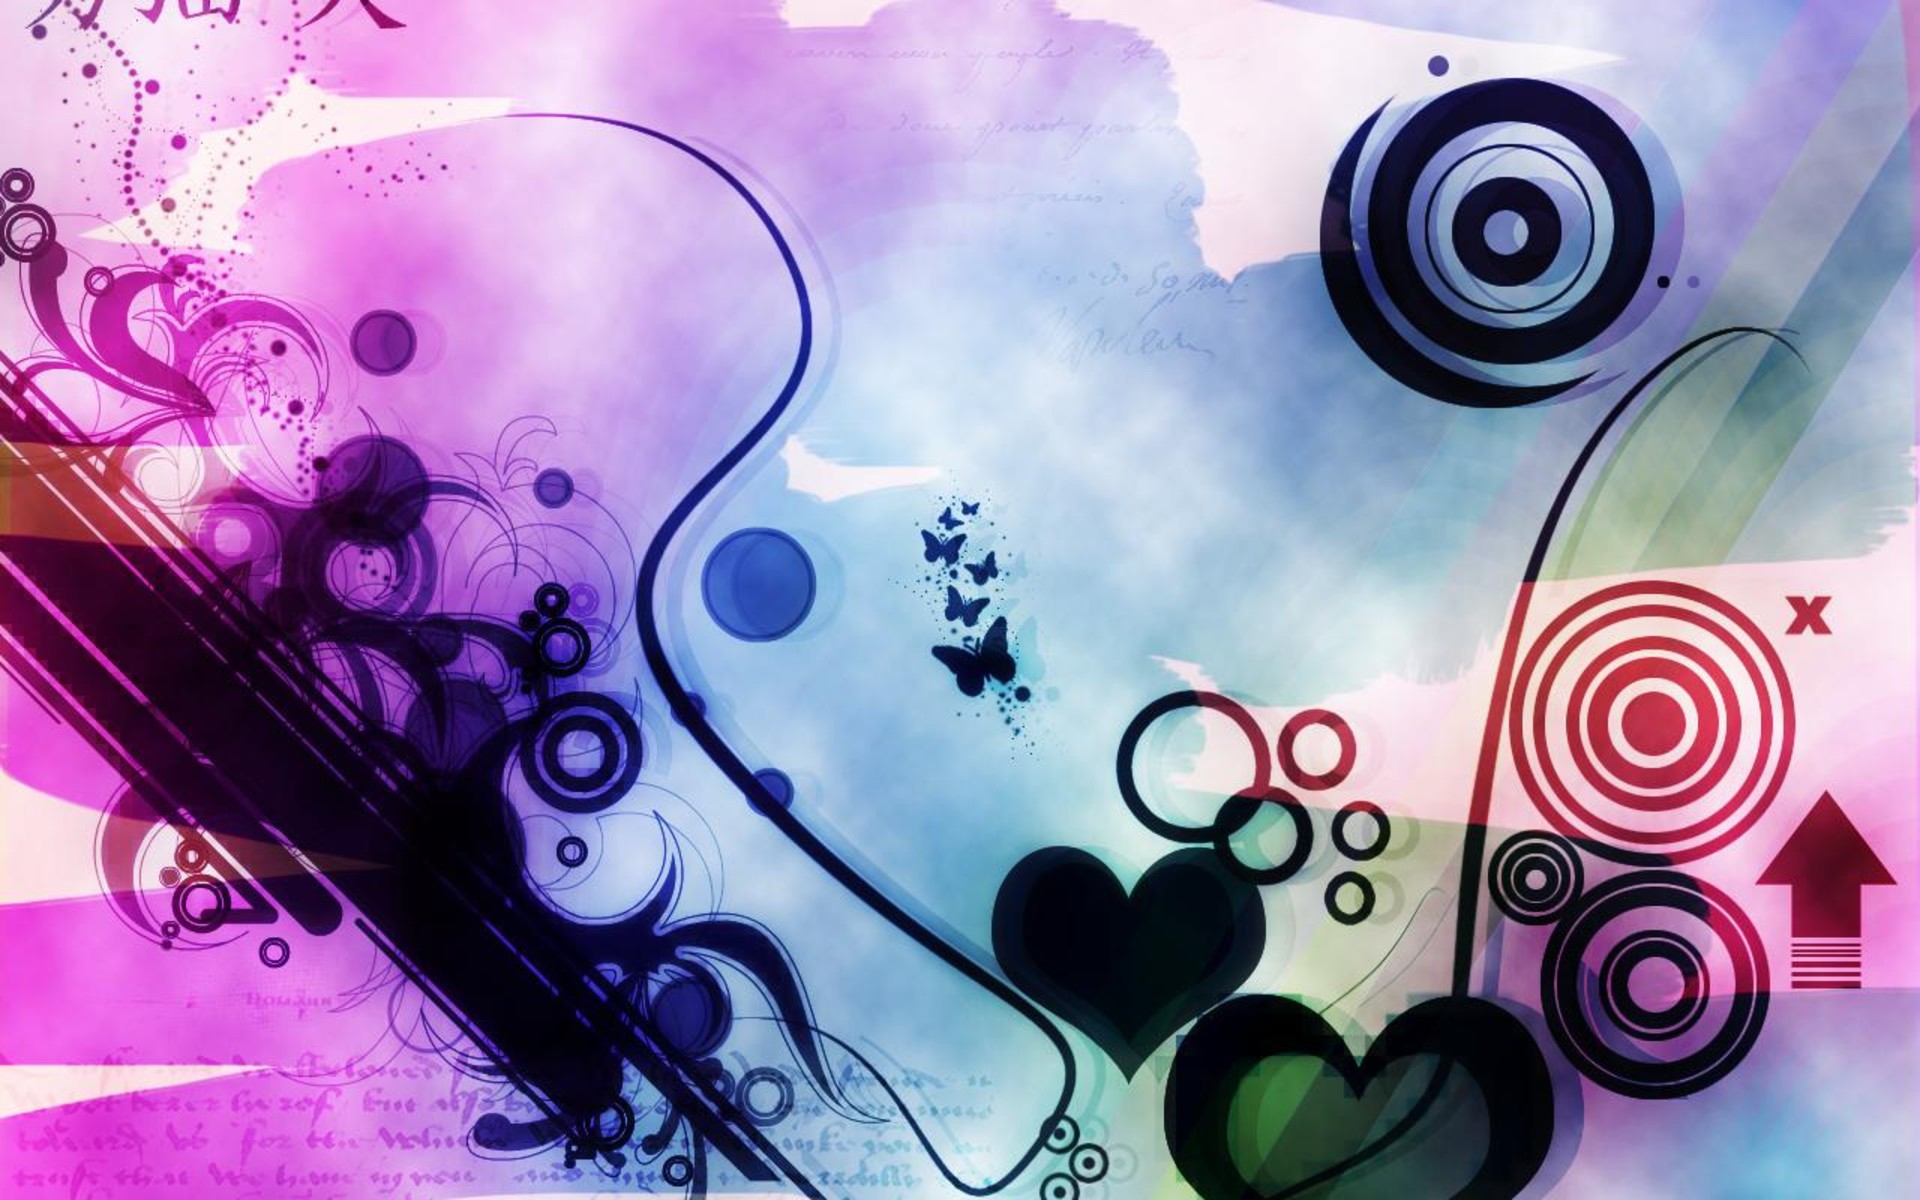 Abstract Love Wallpaper Image Pics - Love Abstract Background Hd - HD Wallpaper 